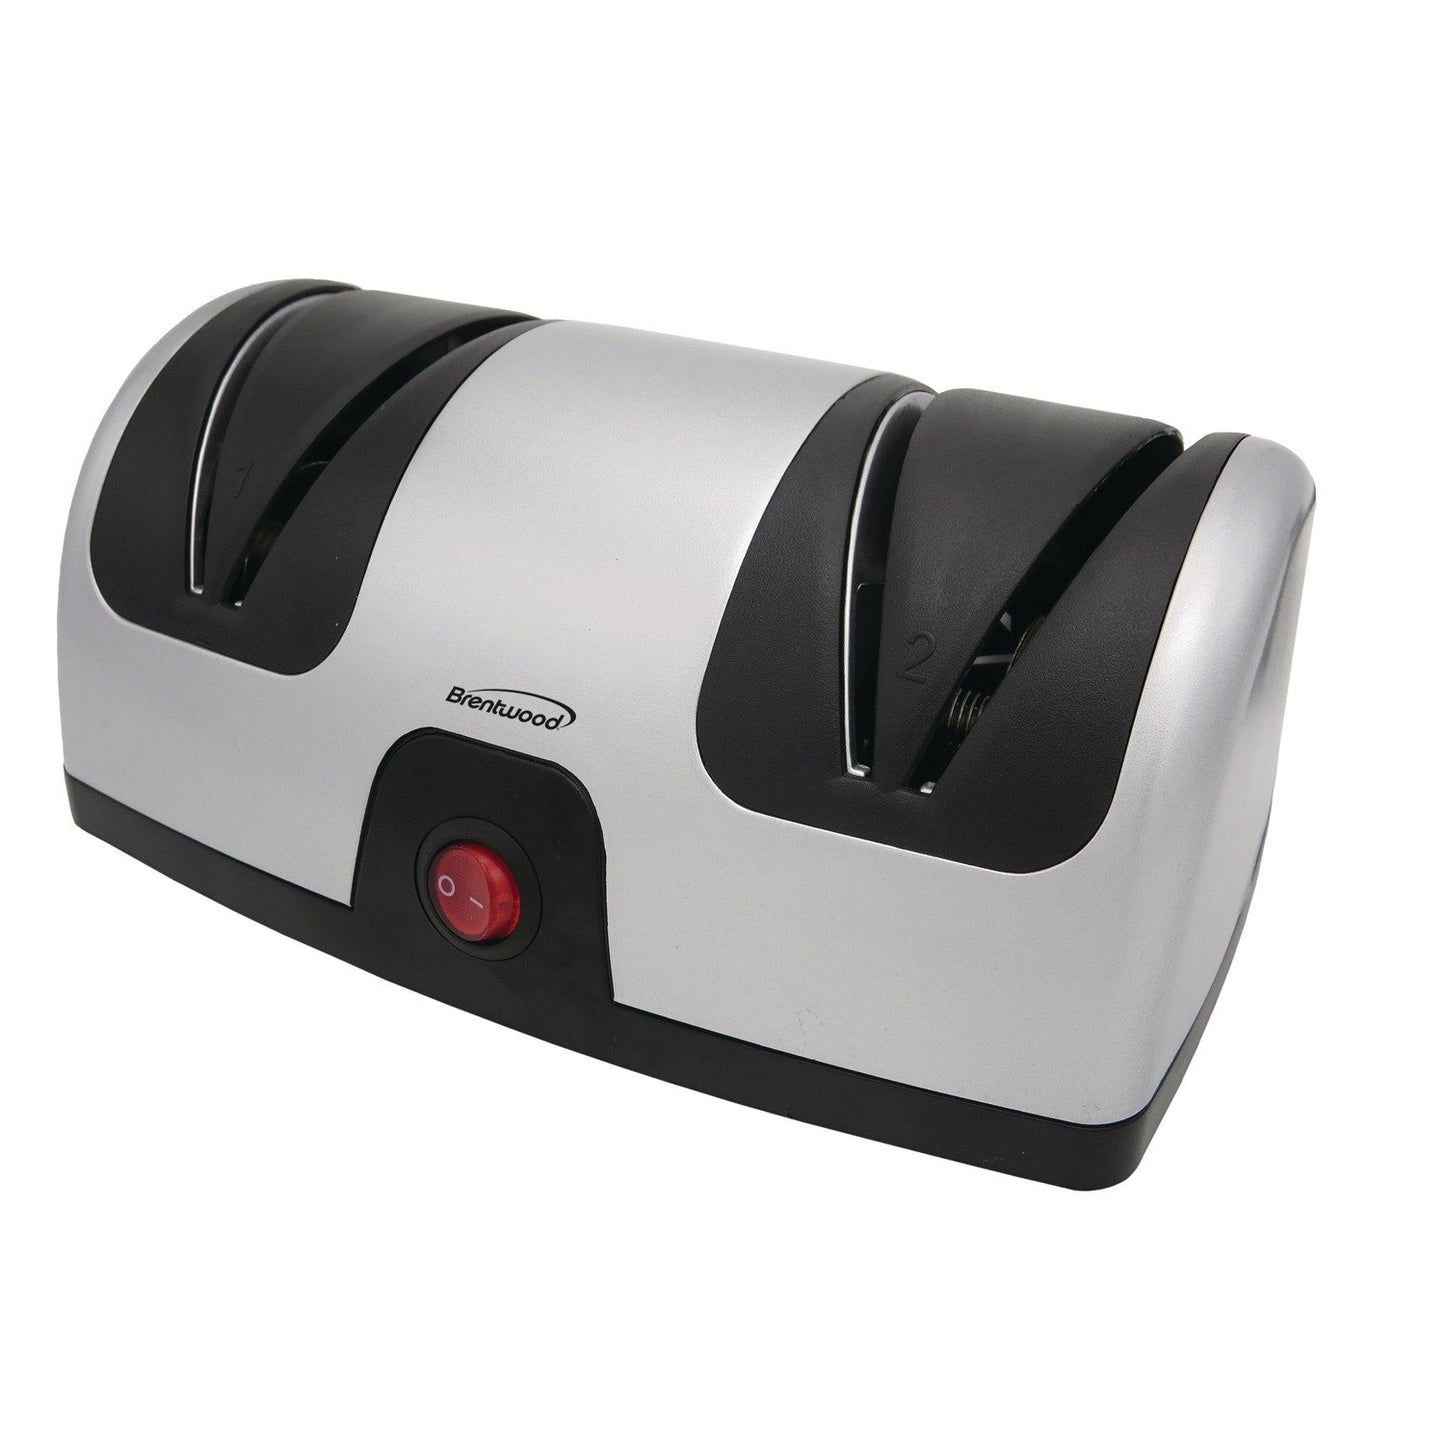 Brentwood Appliances TS-1001 2-Stage Electric Knife Sharpener